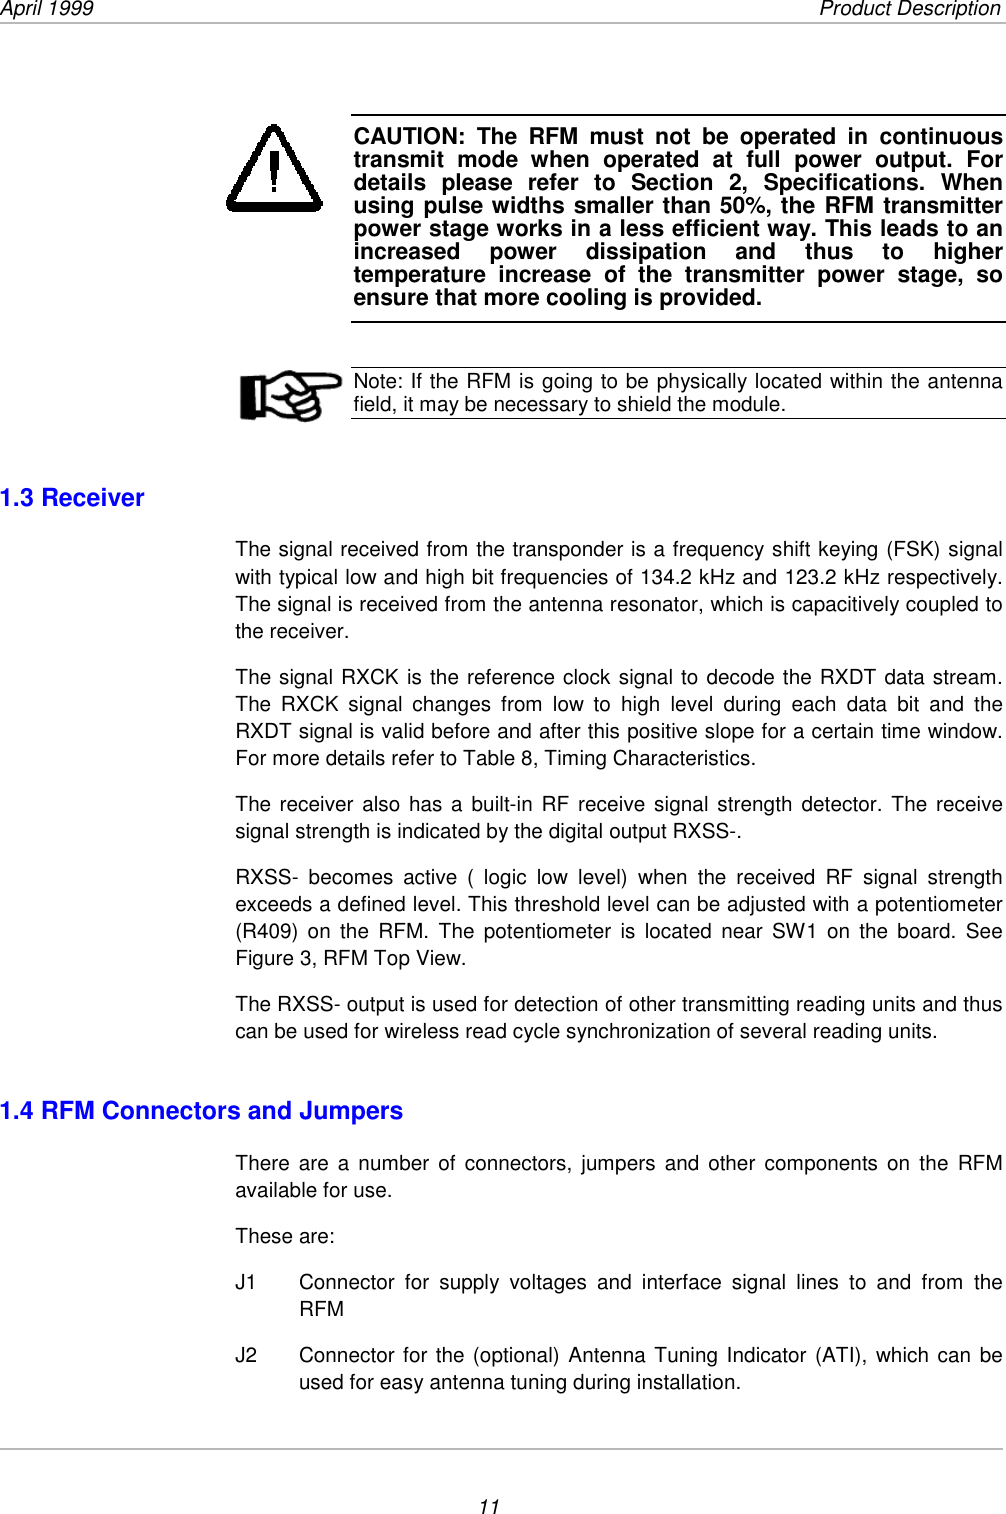 April 1999             Product Description11CAUTION: The RFM must not be operated in continuoustransmit mode when operated at full power output. Fordetails please refer to Section 2, Specifications. Whenusing pulse widths smaller than 50%, the RFM transmitterpower stage works in a less efficient way. This leads to anincreased power dissipation and thus to highertemperature increase of the transmitter power stage, soensure that more cooling is provided.Note: If the RFM is going to be physically located within the antennafield, it may be necessary to shield the module.1.3 ReceiverThe signal received from the transponder is a frequency shift keying (FSK) signalwith typical low and high bit frequencies of 134.2 kHz and 123.2 kHz respectively.The signal is received from the antenna resonator, which is capacitively coupled tothe receiver.The signal RXCK is the reference clock signal to decode the RXDT data stream.The RXCK signal changes from low to high level during each data bit and theRXDT signal is valid before and after this positive slope for a certain time window.For more details refer to Table 8, Timing Characteristics.The receiver also has a built-in RF receive signal strength detector. The receivesignal strength is indicated by the digital output RXSS-.RXSS- becomes active ( logic low level) when the received RF signal strengthexceeds a defined level. This threshold level can be adjusted with a potentiometer(R409) on the RFM. The potentiometer is located near SW1 on the board. SeeFigure 3, RFM Top View.The RXSS- output is used for detection of other transmitting reading units and thuscan be used for wireless read cycle synchronization of several reading units.1.4 RFM Connectors and JumpersThere are a number of connectors, jumpers and other components on the RFMavailable for use.These are:J1  Connector for supply voltages and interface signal lines to and from theRFMJ2  Connector for the (optional) Antenna Tuning Indicator (ATI), which can beused for easy antenna tuning during installation.